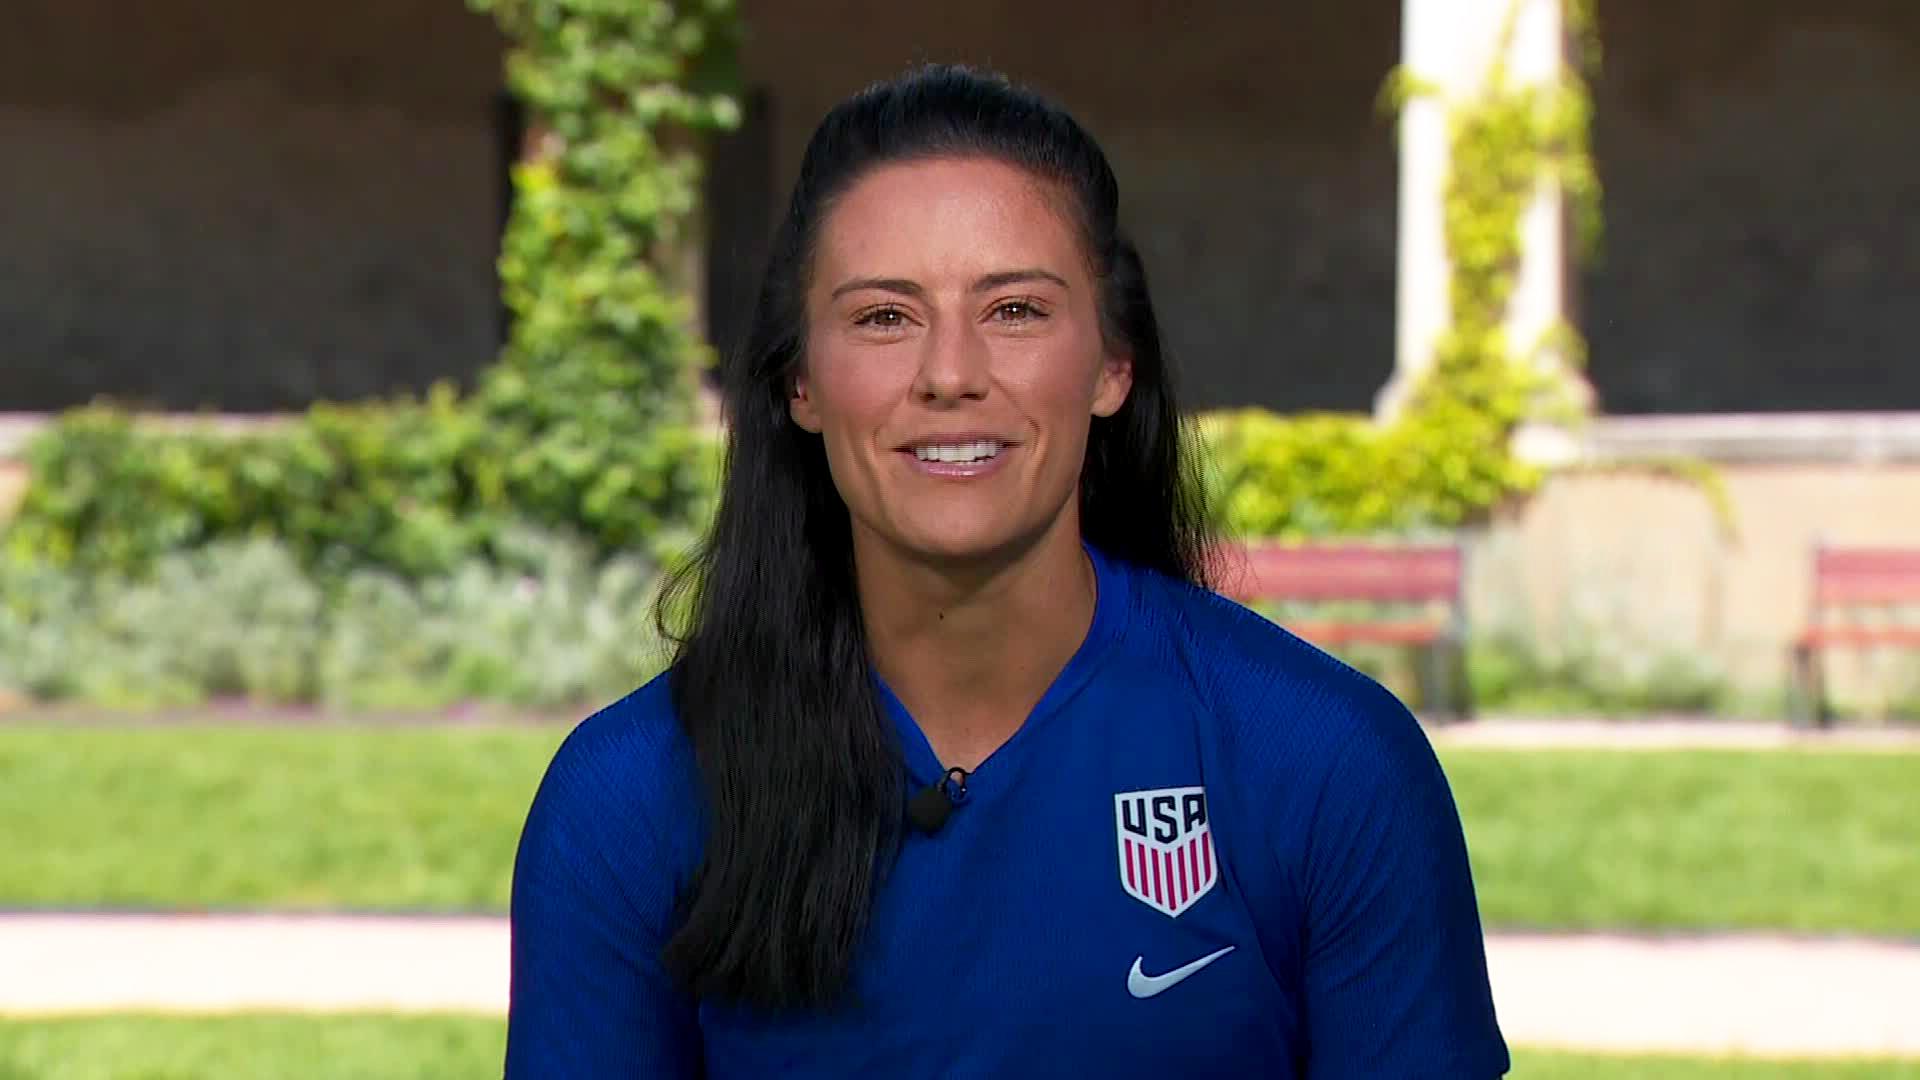 World Cup player: I will absolutely not go to the White House